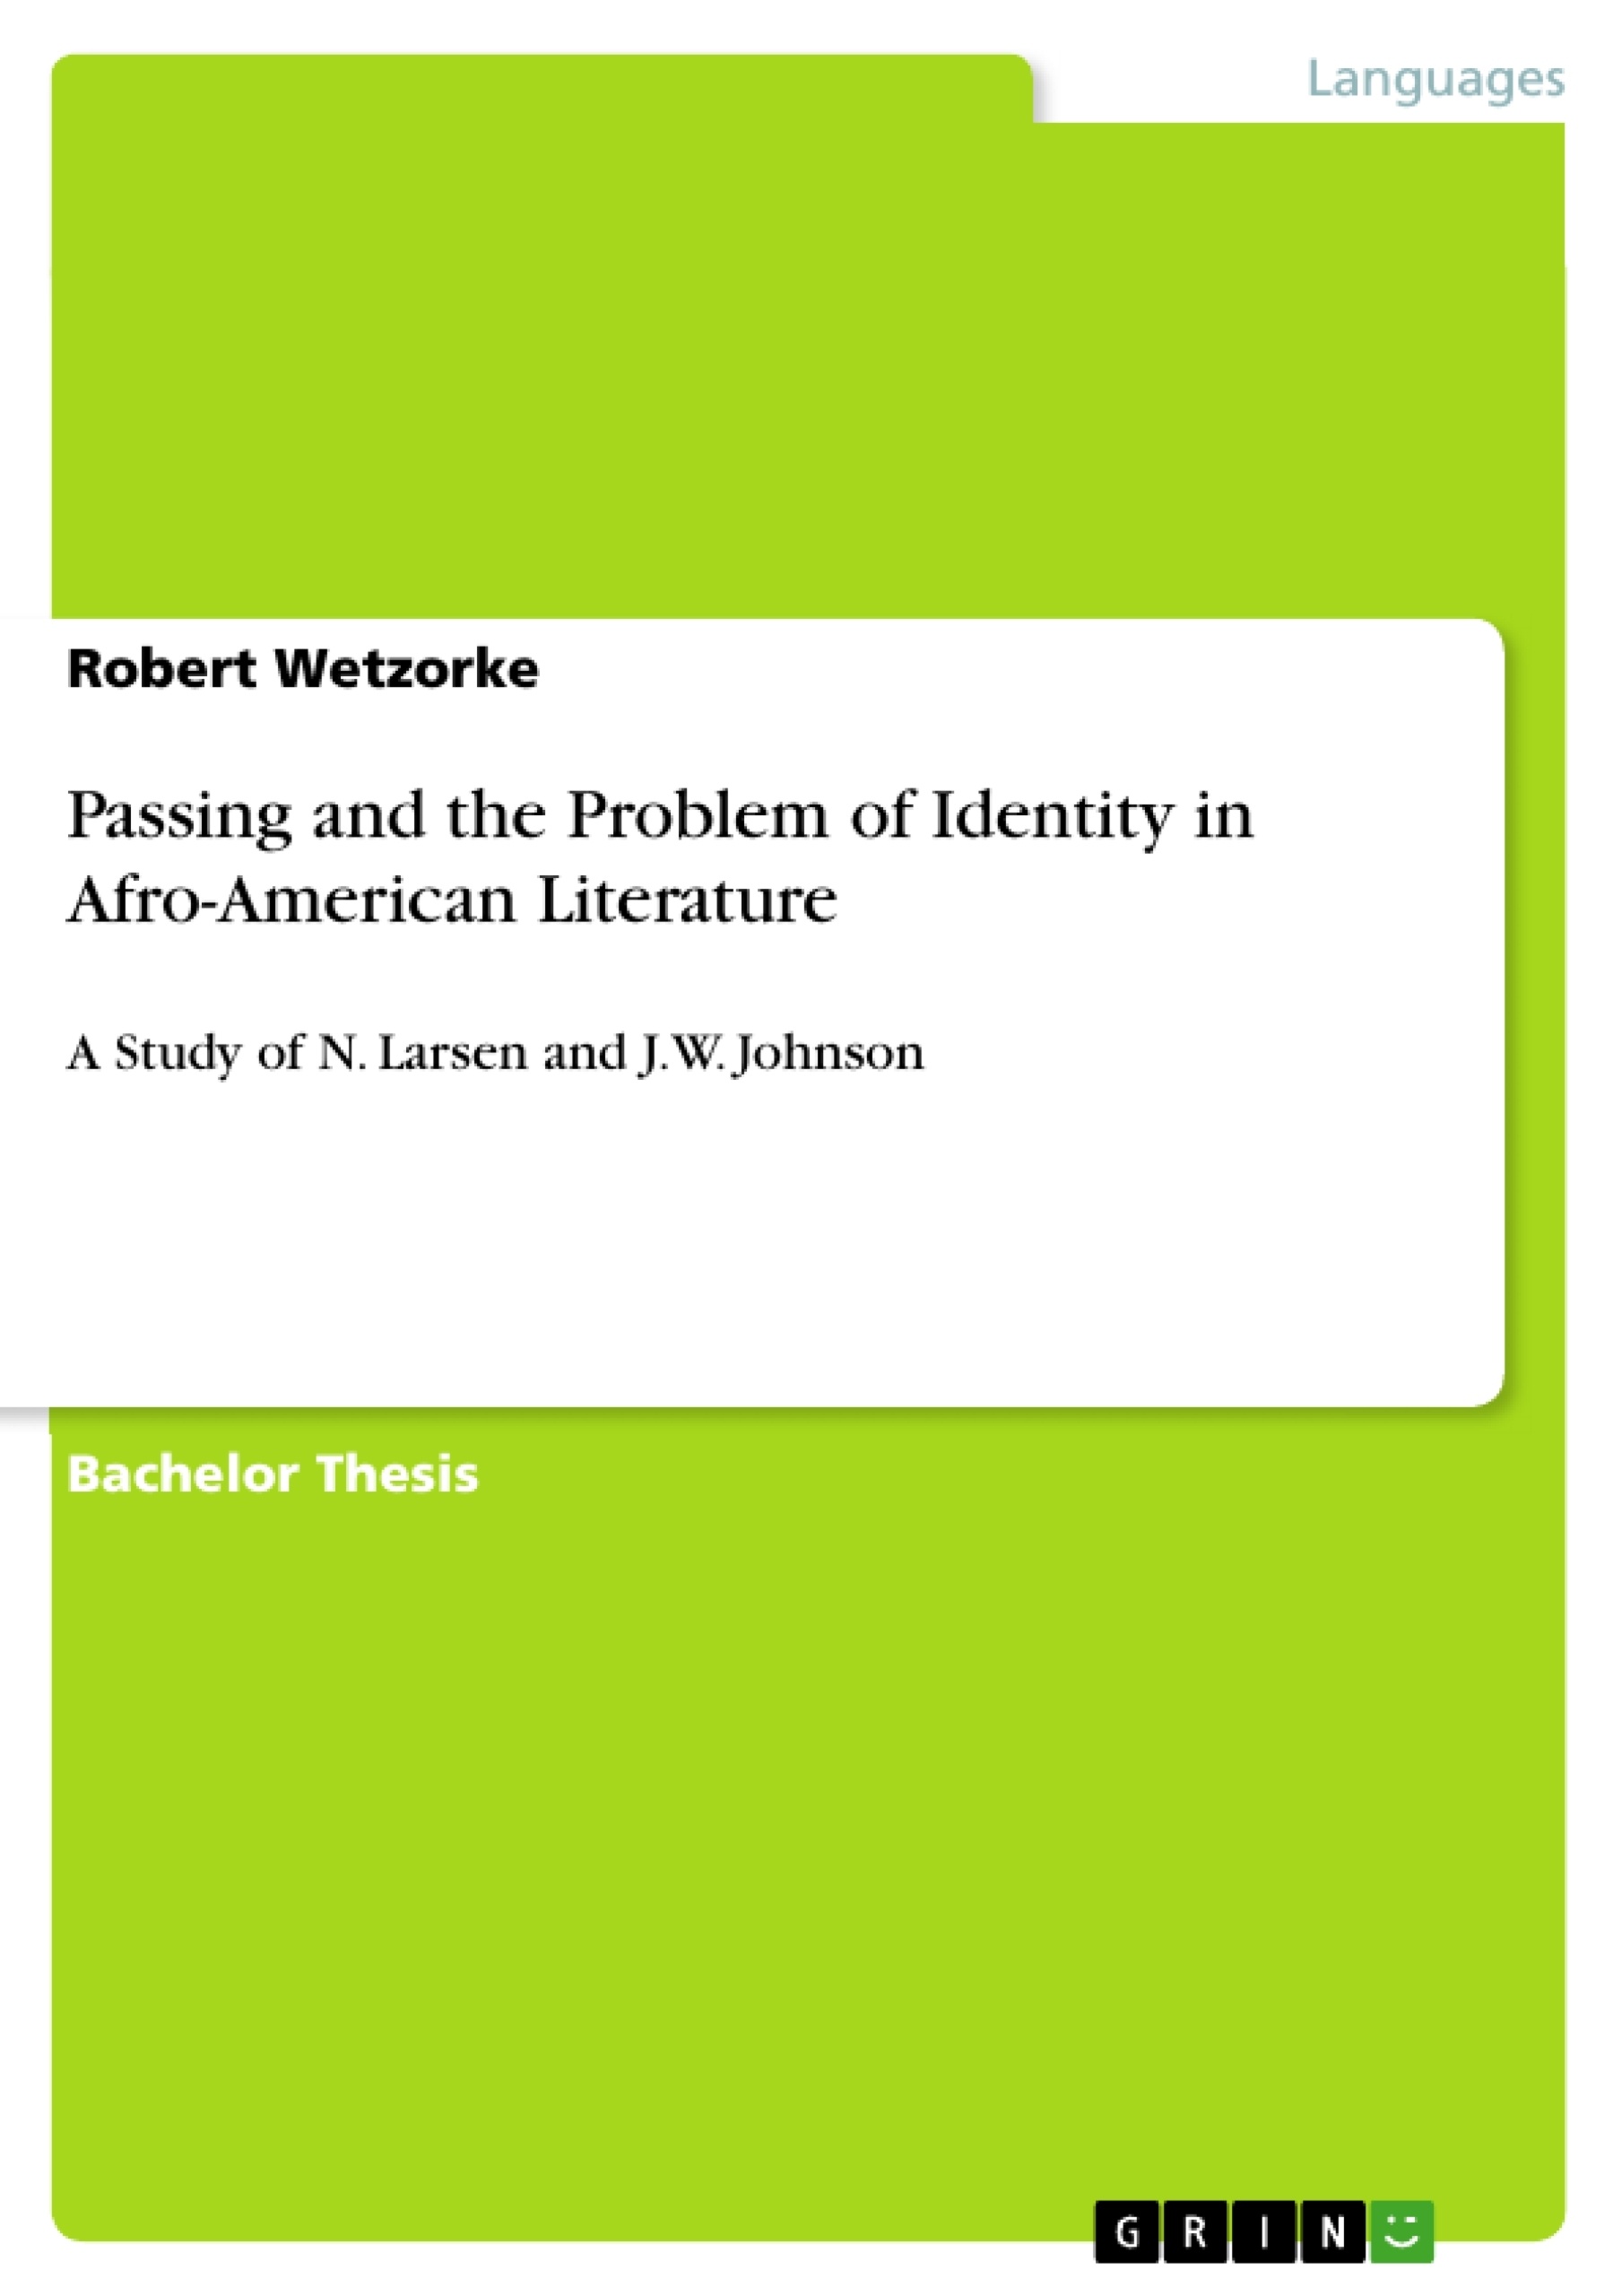 Title: Passing and the Problem of Identity in Afro-American Literature